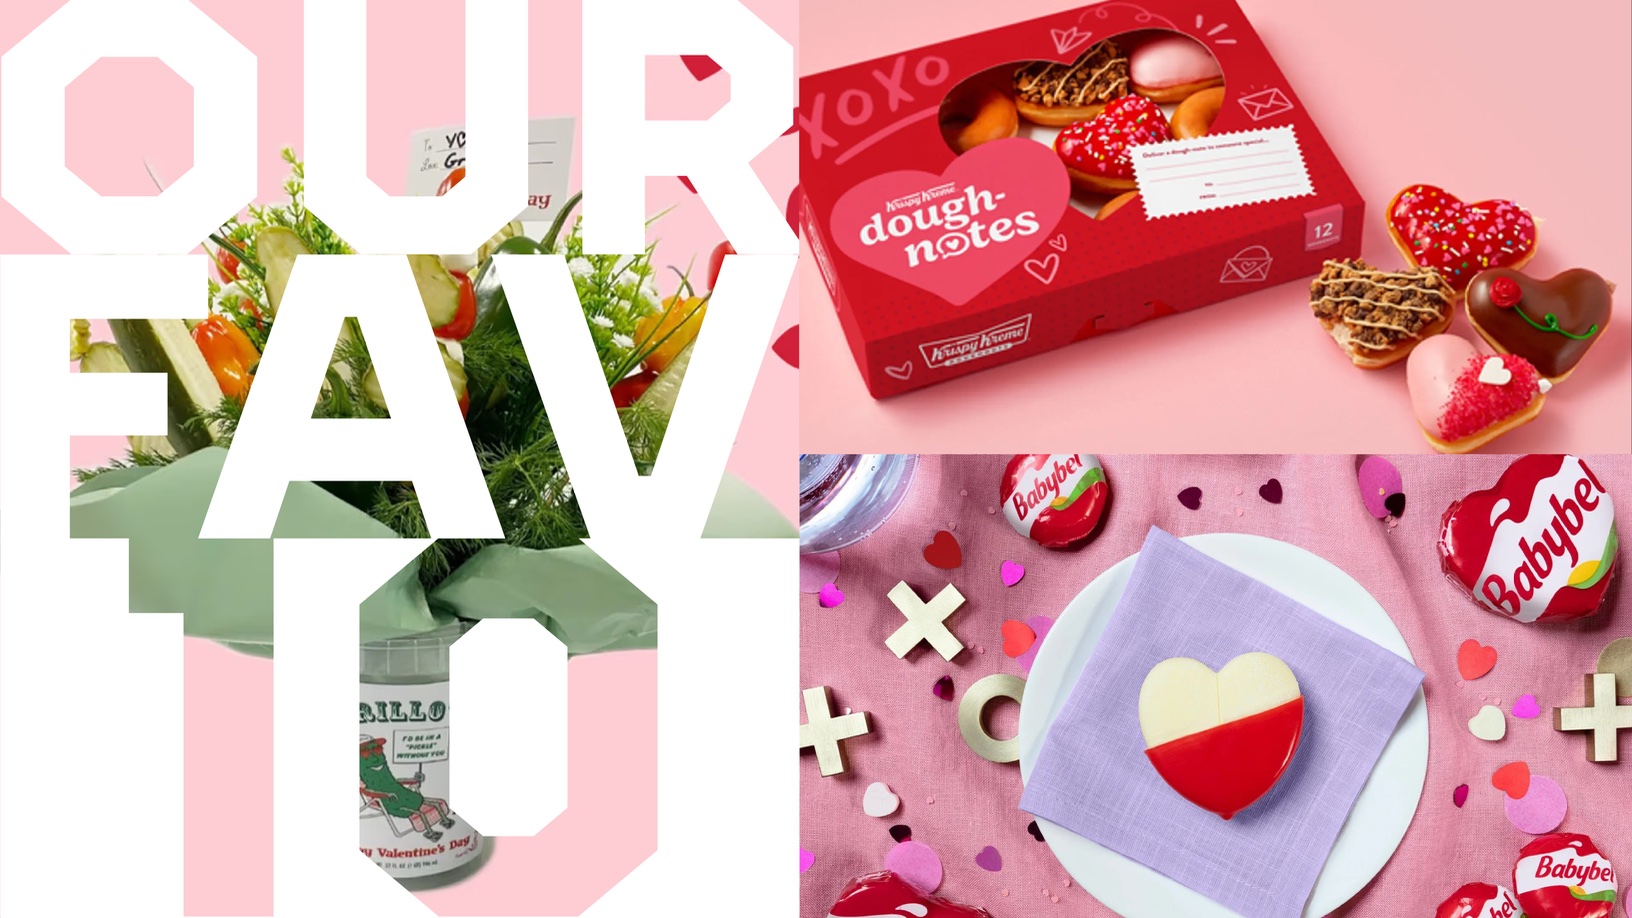 These Ten Brands Are Spreading Love This Valentine’s Day